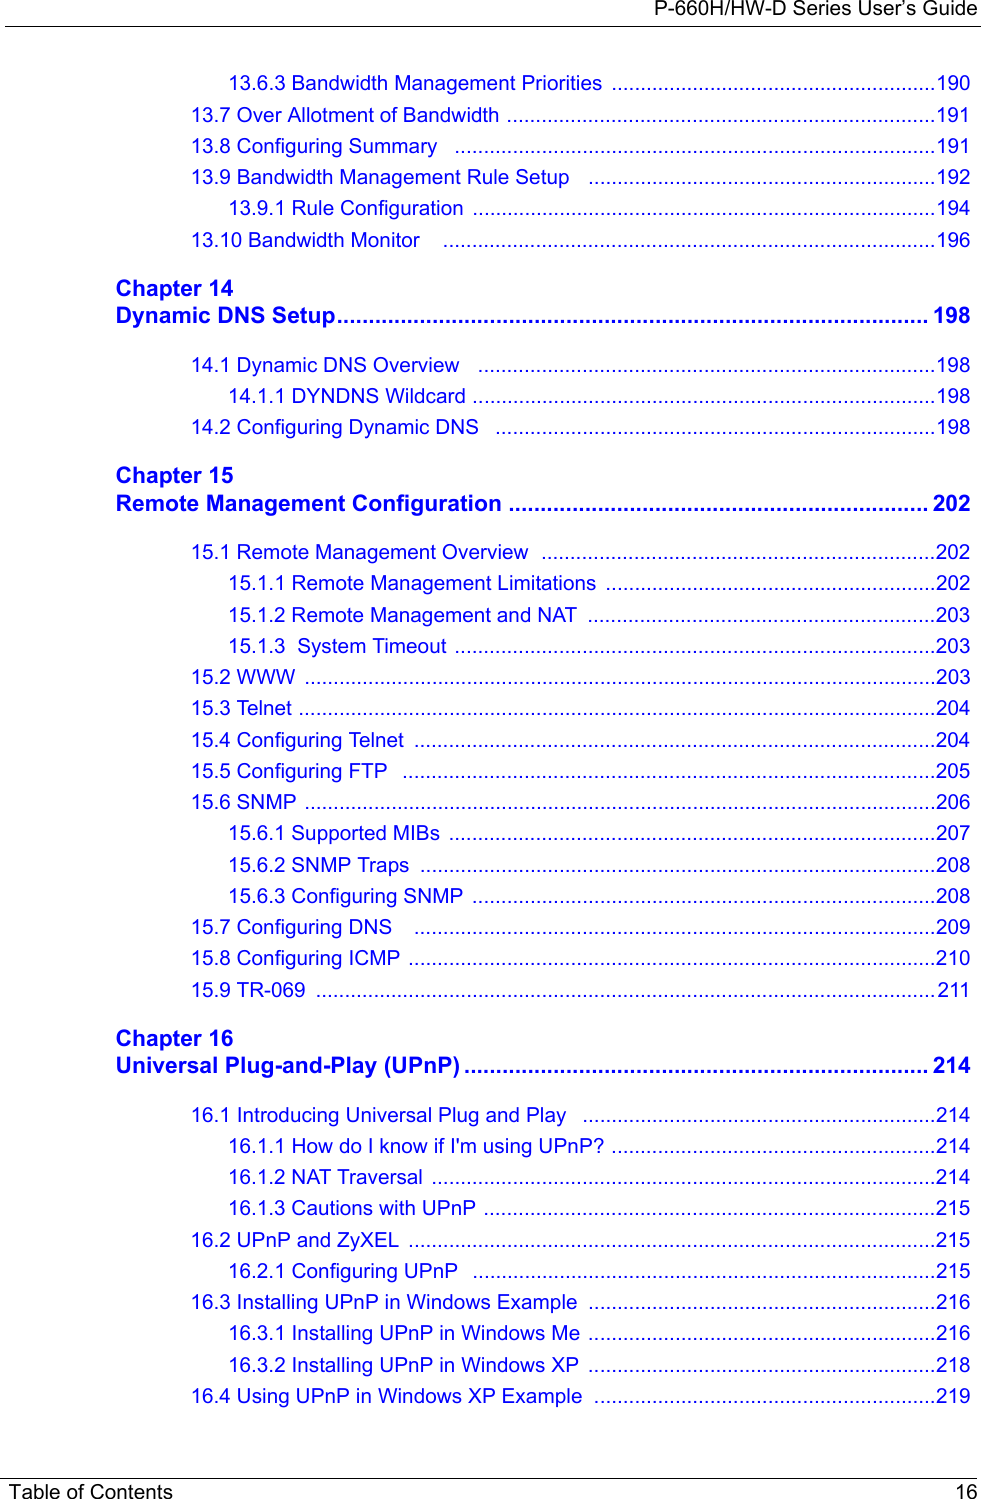 P-660H/HW-D Series User’s GuideTable of Contents 1613.6.3 Bandwidth Management Priorities  ........................................................19013.7 Over Allotment of Bandwidth ..........................................................................19113.8 Configuring Summary   ...................................................................................19113.9 Bandwidth Management Rule Setup   ............................................................19213.9.1 Rule Configuration  ................................................................................19413.10 Bandwidth Monitor    .....................................................................................196Chapter 14Dynamic DNS Setup............................................................................................. 19814.1 Dynamic DNS Overview   ...............................................................................19814.1.1 DYNDNS Wildcard ................................................................................19814.2 Configuring Dynamic DNS   ............................................................................198Chapter 15Remote Management Configuration .................................................................. 20215.1 Remote Management Overview  ....................................................................20215.1.1 Remote Management Limitations  .........................................................20215.1.2 Remote Management and NAT  ............................................................20315.1.3  System Timeout ...................................................................................20315.2 WWW  .............................................................................................................20315.3 Telnet ..............................................................................................................20415.4 Configuring Telnet  ..........................................................................................20415.5 Configuring FTP   ............................................................................................20515.6 SNMP .............................................................................................................20615.6.1 Supported MIBs  ....................................................................................20715.6.2 SNMP Traps  .........................................................................................20815.6.3 Configuring SNMP  ................................................................................20815.7 Configuring DNS    ..........................................................................................20915.8 Configuring ICMP ...........................................................................................21015.9 TR-069  ...........................................................................................................211Chapter 16Universal Plug-and-Play (UPnP) ......................................................................... 21416.1 Introducing Universal Plug and Play   .............................................................21416.1.1 How do I know if I&apos;m using UPnP? ........................................................21416.1.2 NAT Traversal  .......................................................................................21416.1.3 Cautions with UPnP ..............................................................................21516.2 UPnP and ZyXEL  ...........................................................................................21516.2.1 Configuring UPnP   ................................................................................21516.3 Installing UPnP in Windows Example  ............................................................21616.3.1 Installing UPnP in Windows Me ............................................................21616.3.2 Installing UPnP in Windows XP  ............................................................21816.4 Using UPnP in Windows XP Example  ...........................................................219